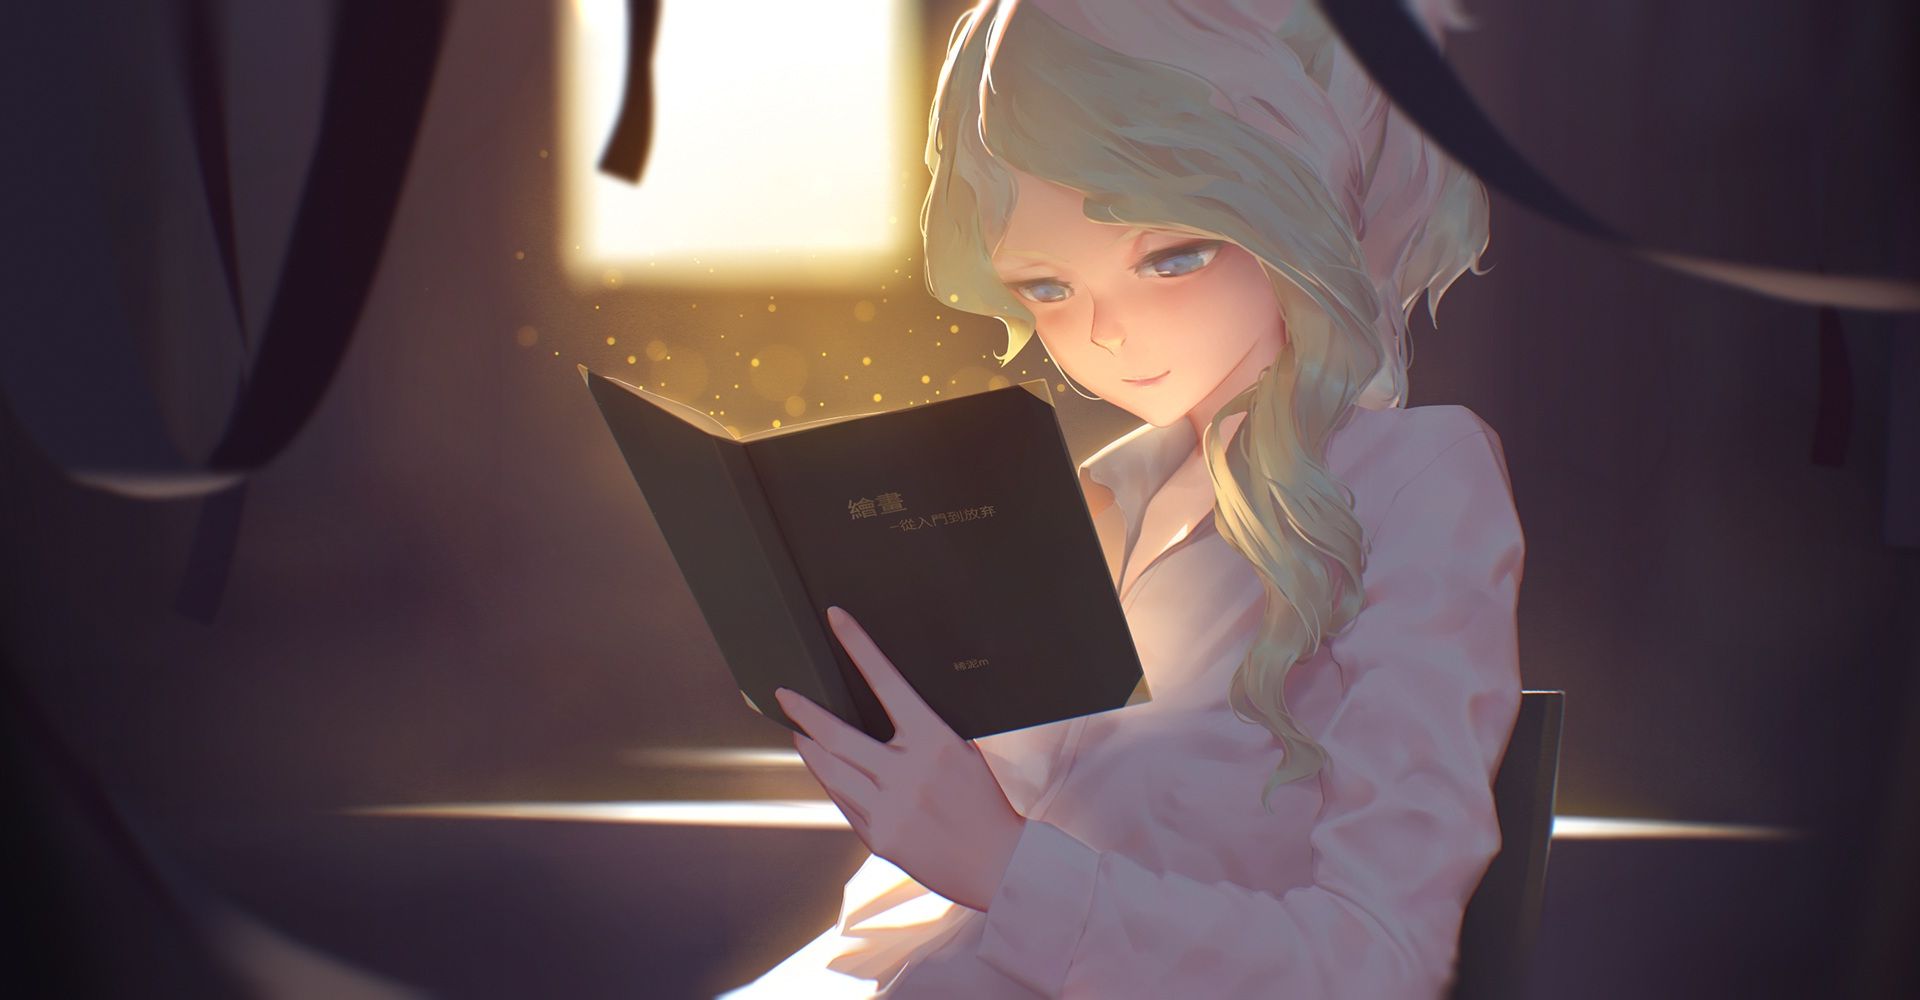 Desktop Wallpaper Little Witch Academia, Anime Girl, Reading Book, HD Image, Picture, Background, C13f89